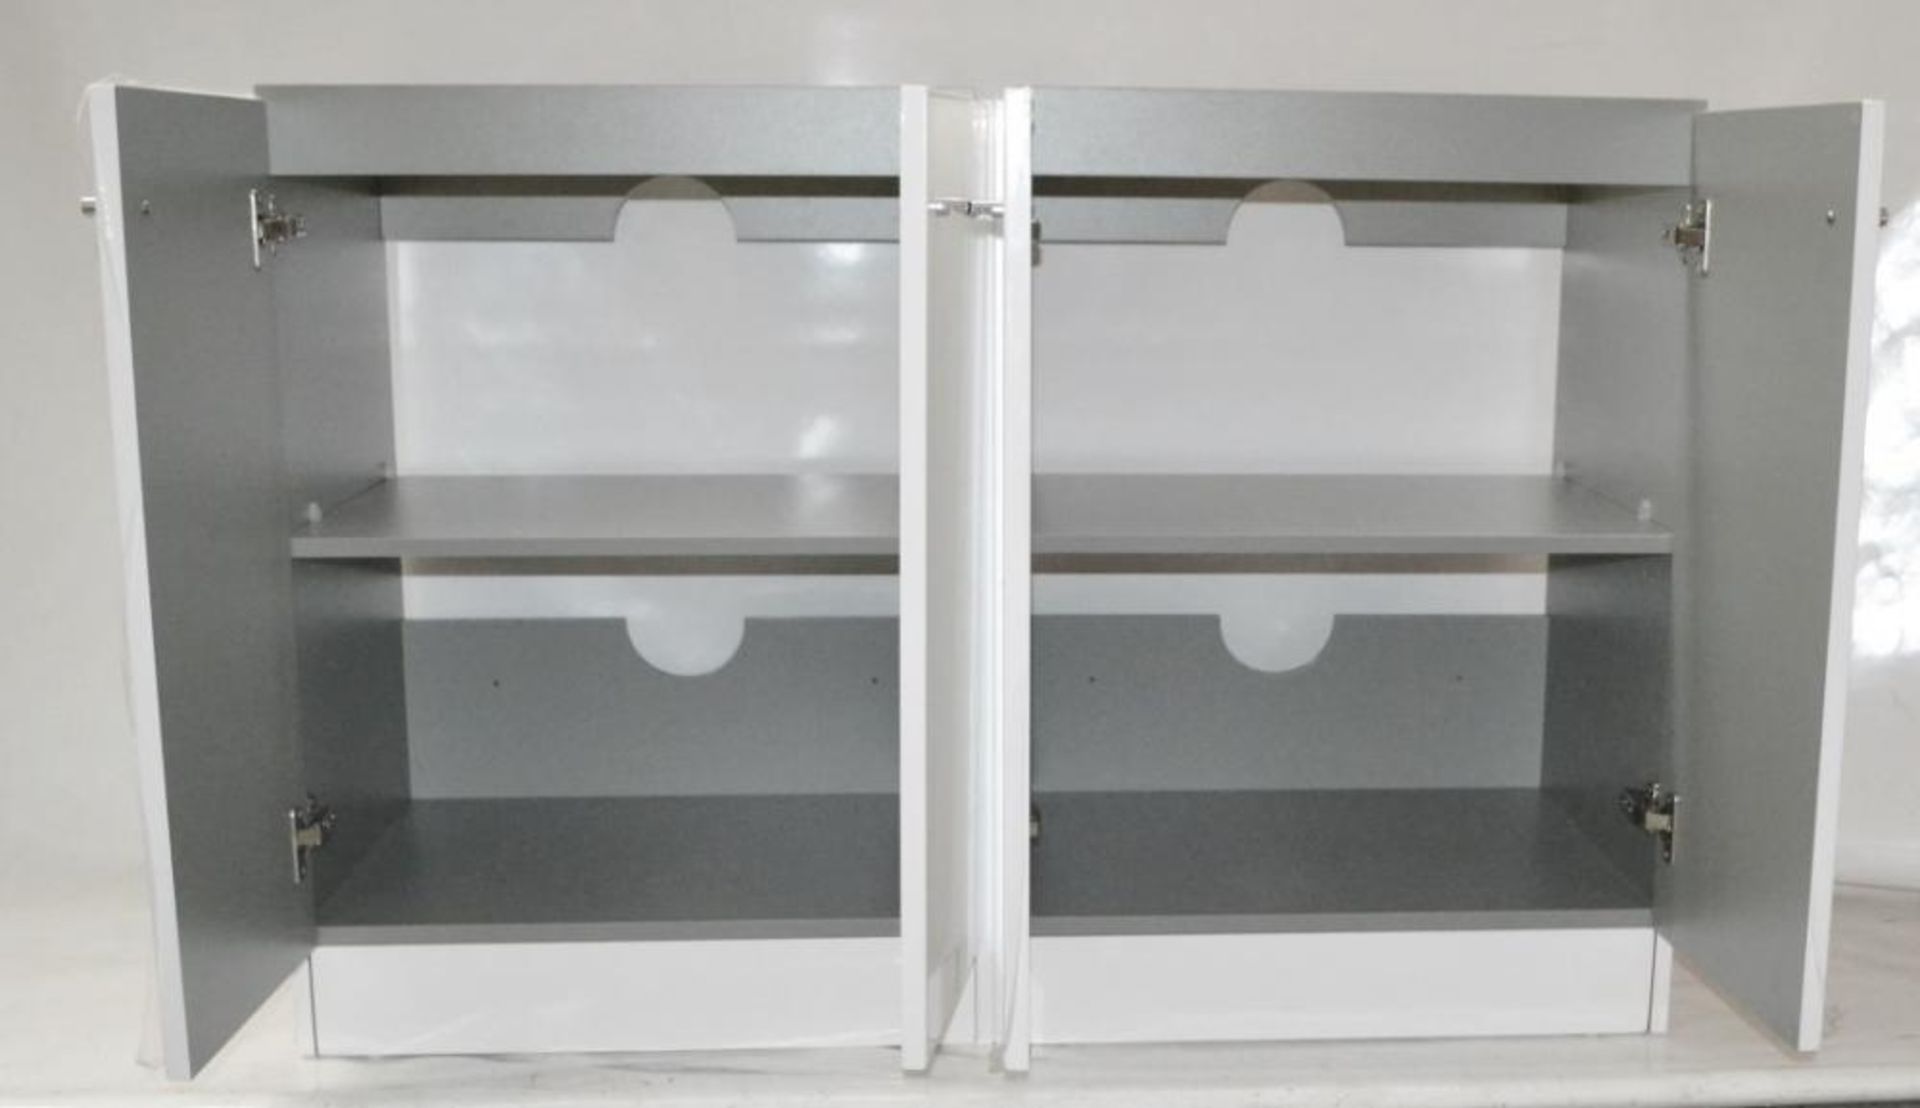 1 x Gloss White 1200mm 4-Door Double Basin Freestanding Bathroom Cabinet - New & Boxed Stock - CL307 - Image 7 of 7